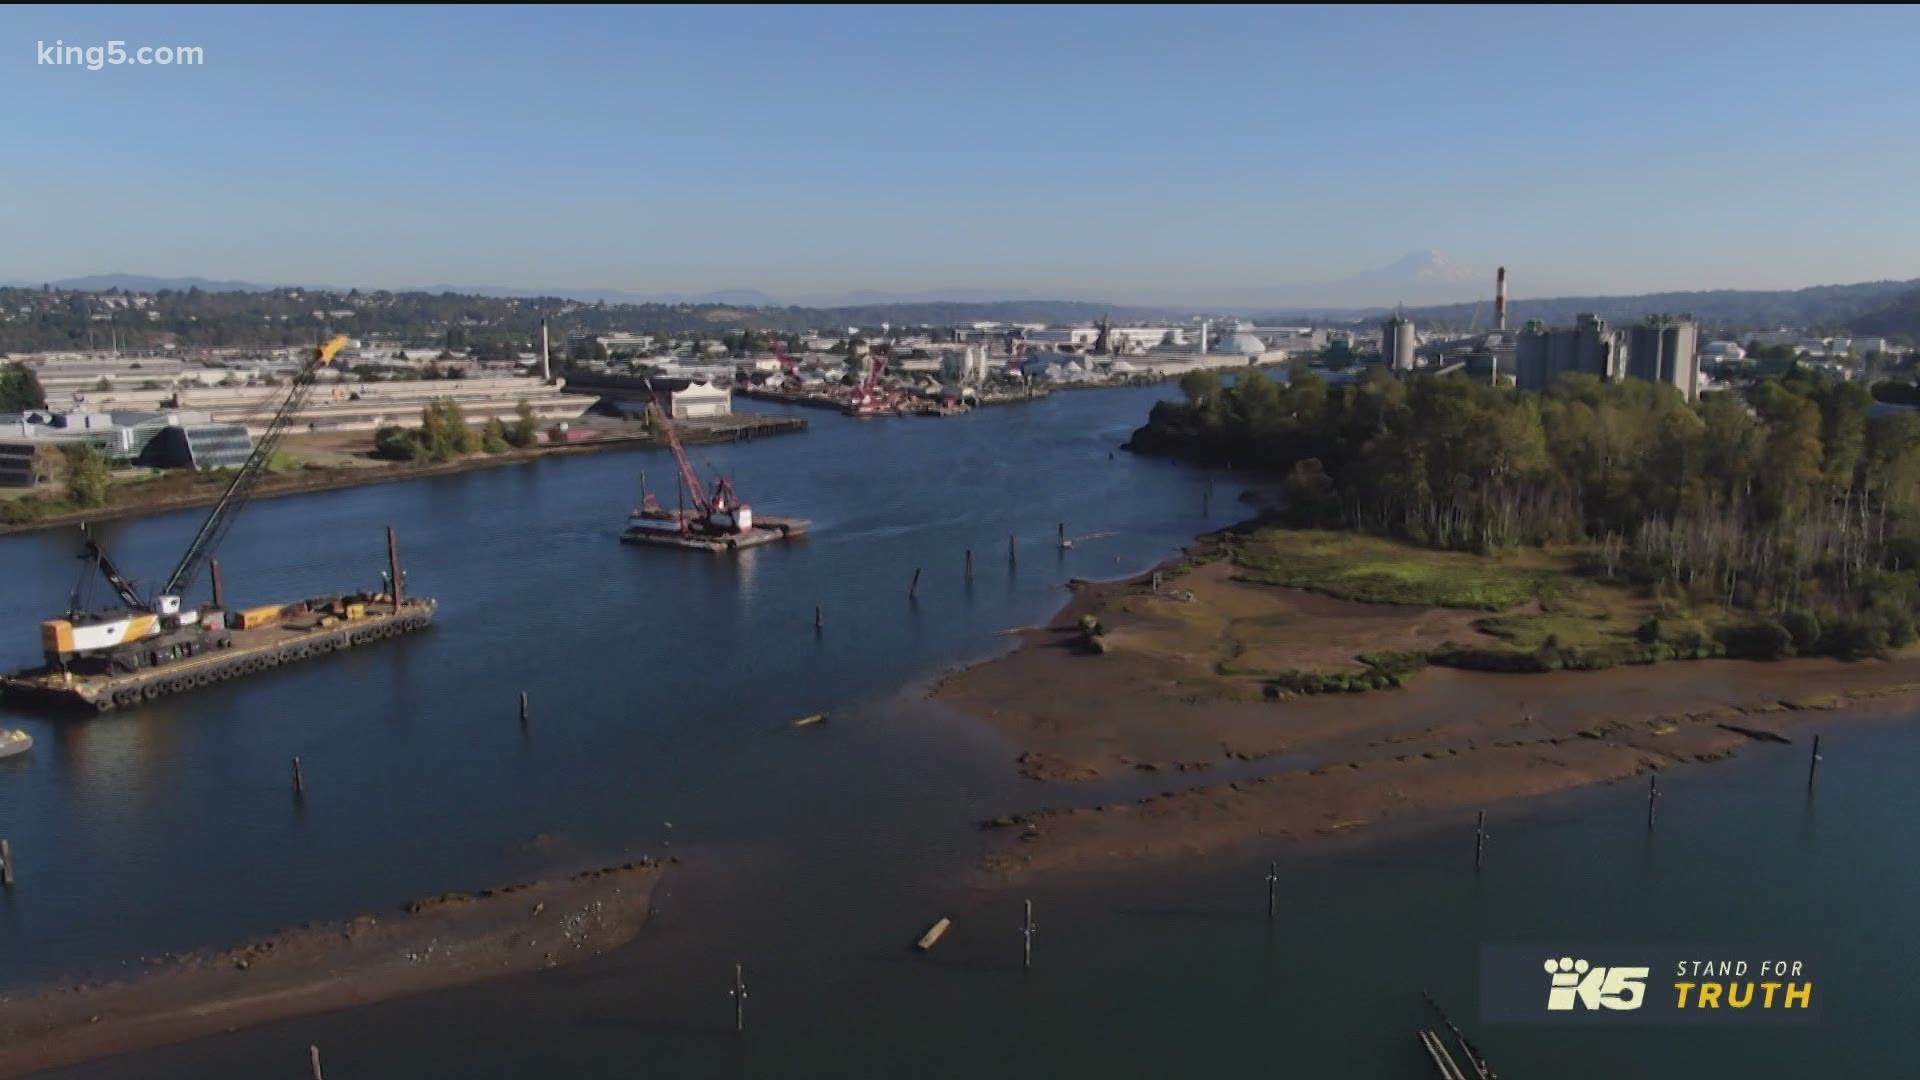 An 1855 treaty ceded Duwamish land in exchange for rights and a reservation. But the tribe is still fighting for recognition after the U.S. broke its promises.